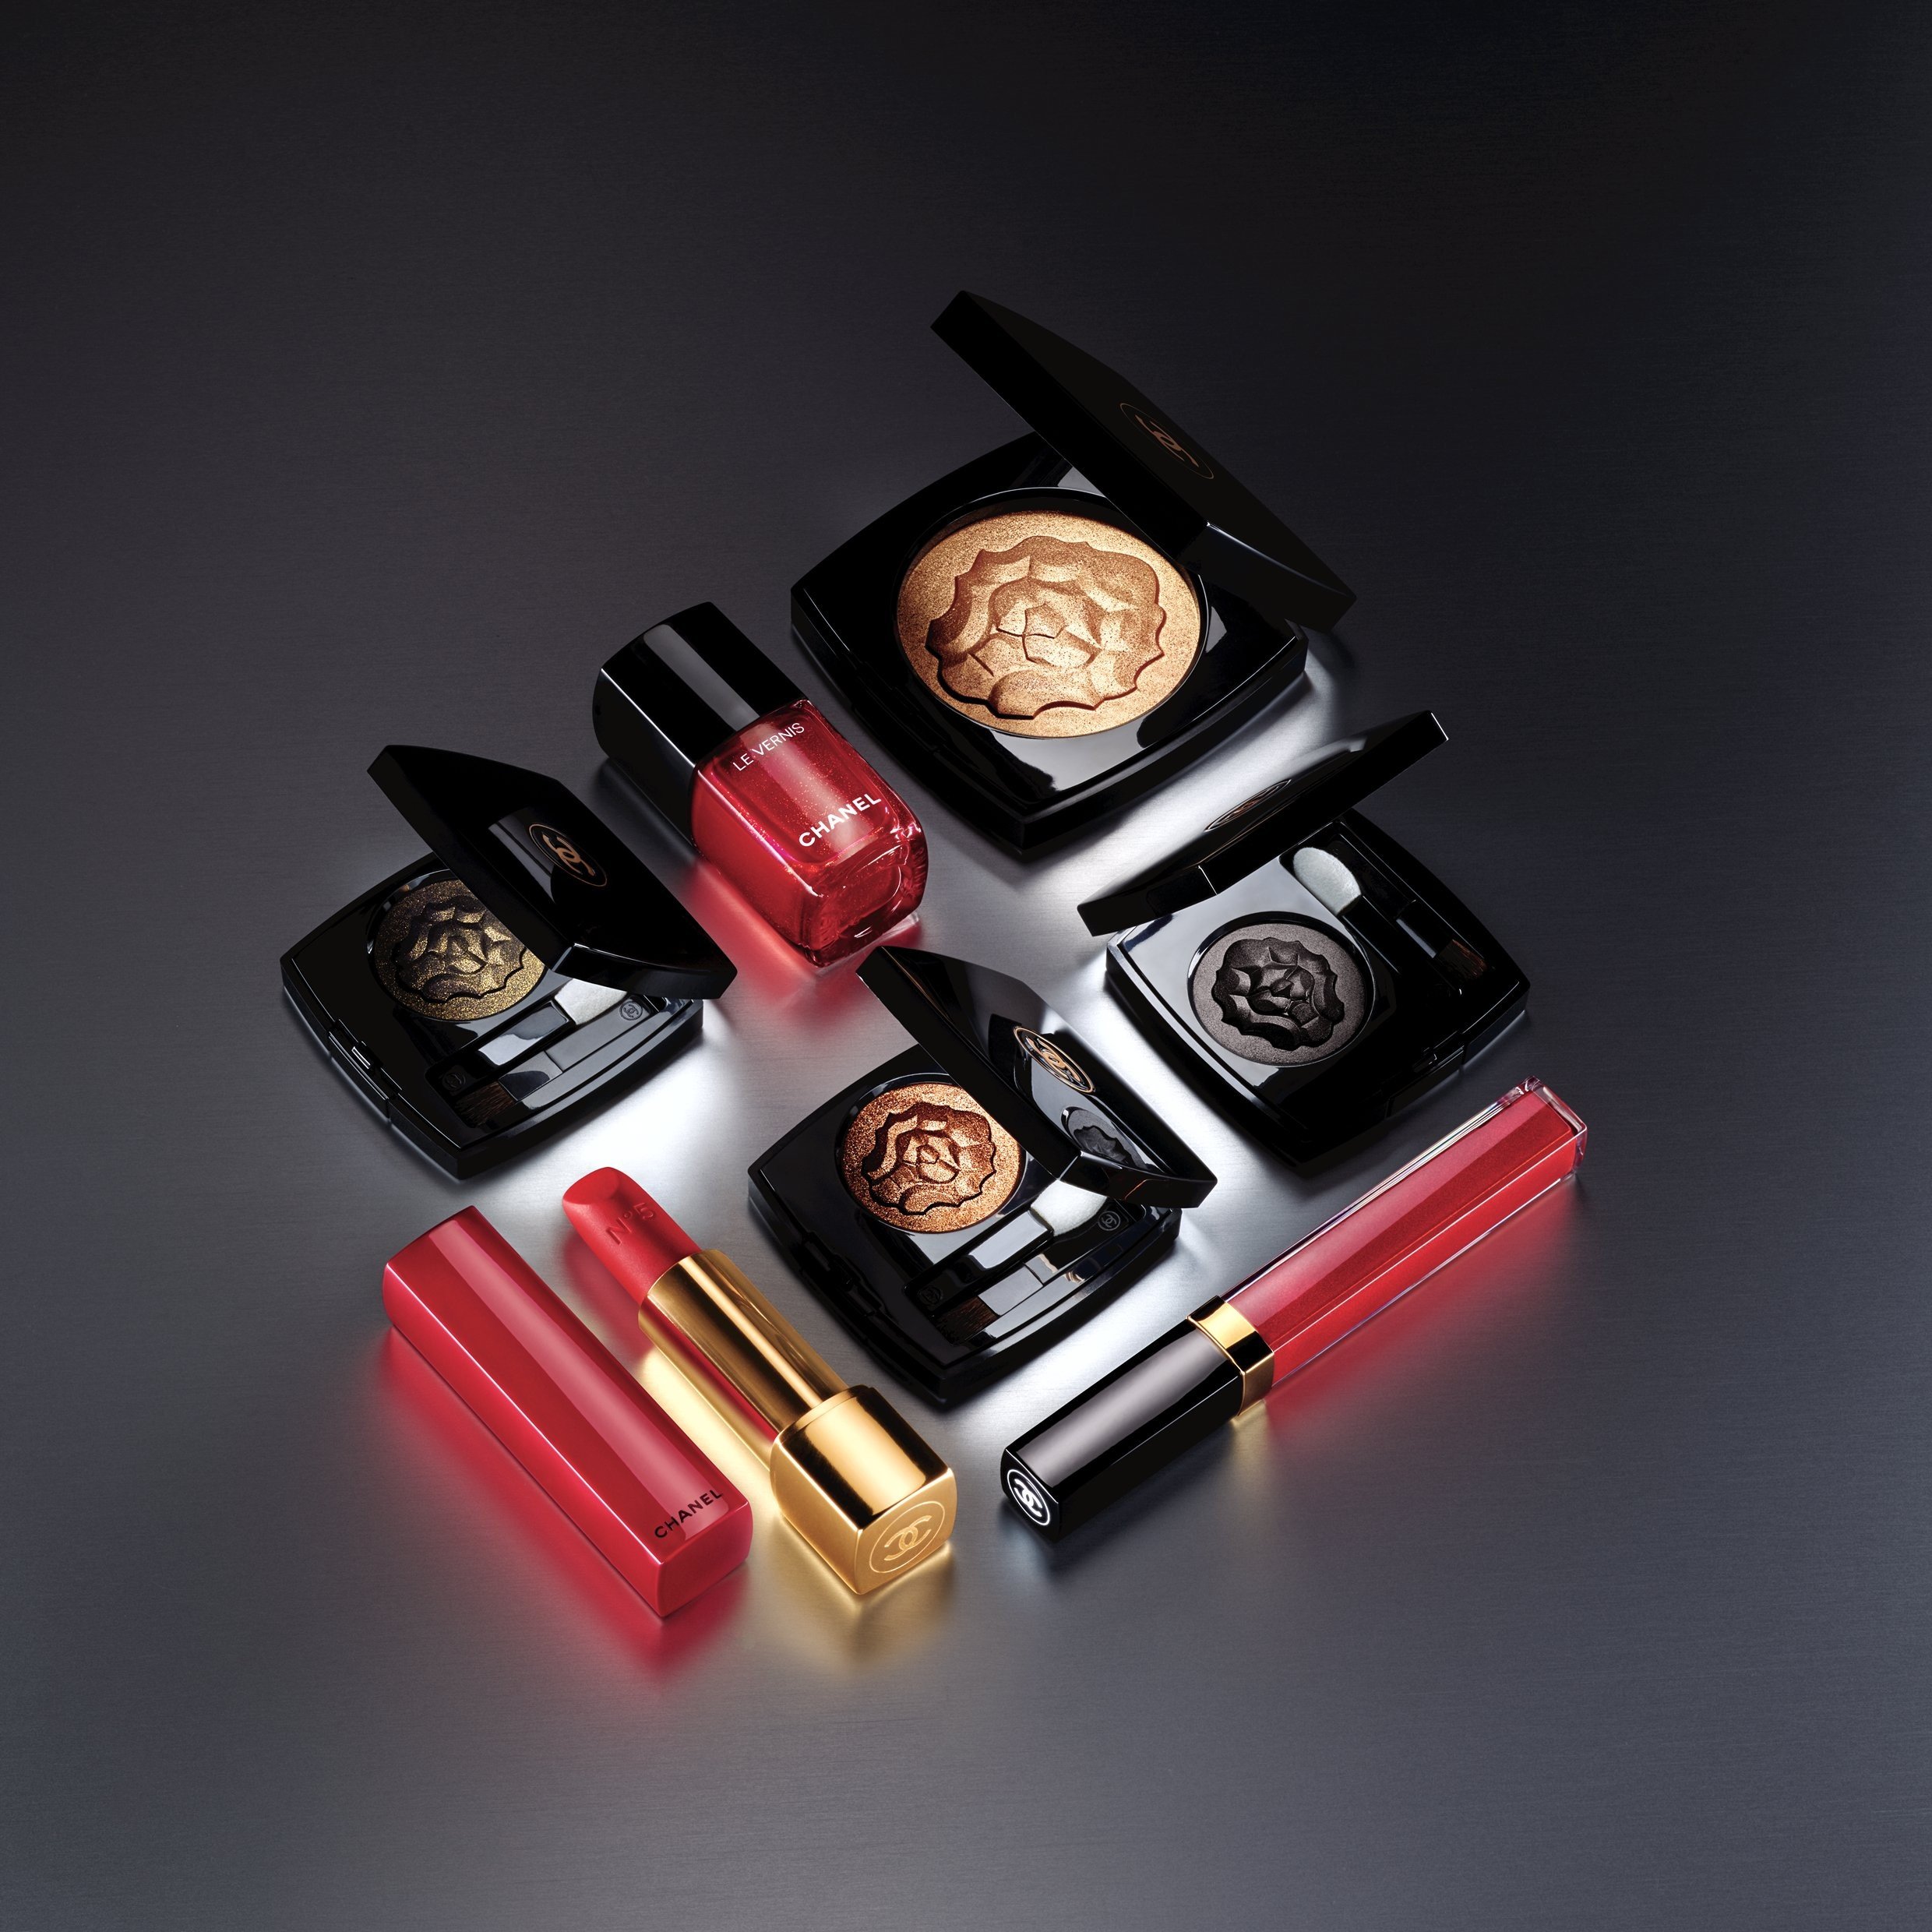 Chanel’s new Christmas make-up collection, Collection Libre, which includes eye shadow, lipsticks, lip gloss and a highlighter.